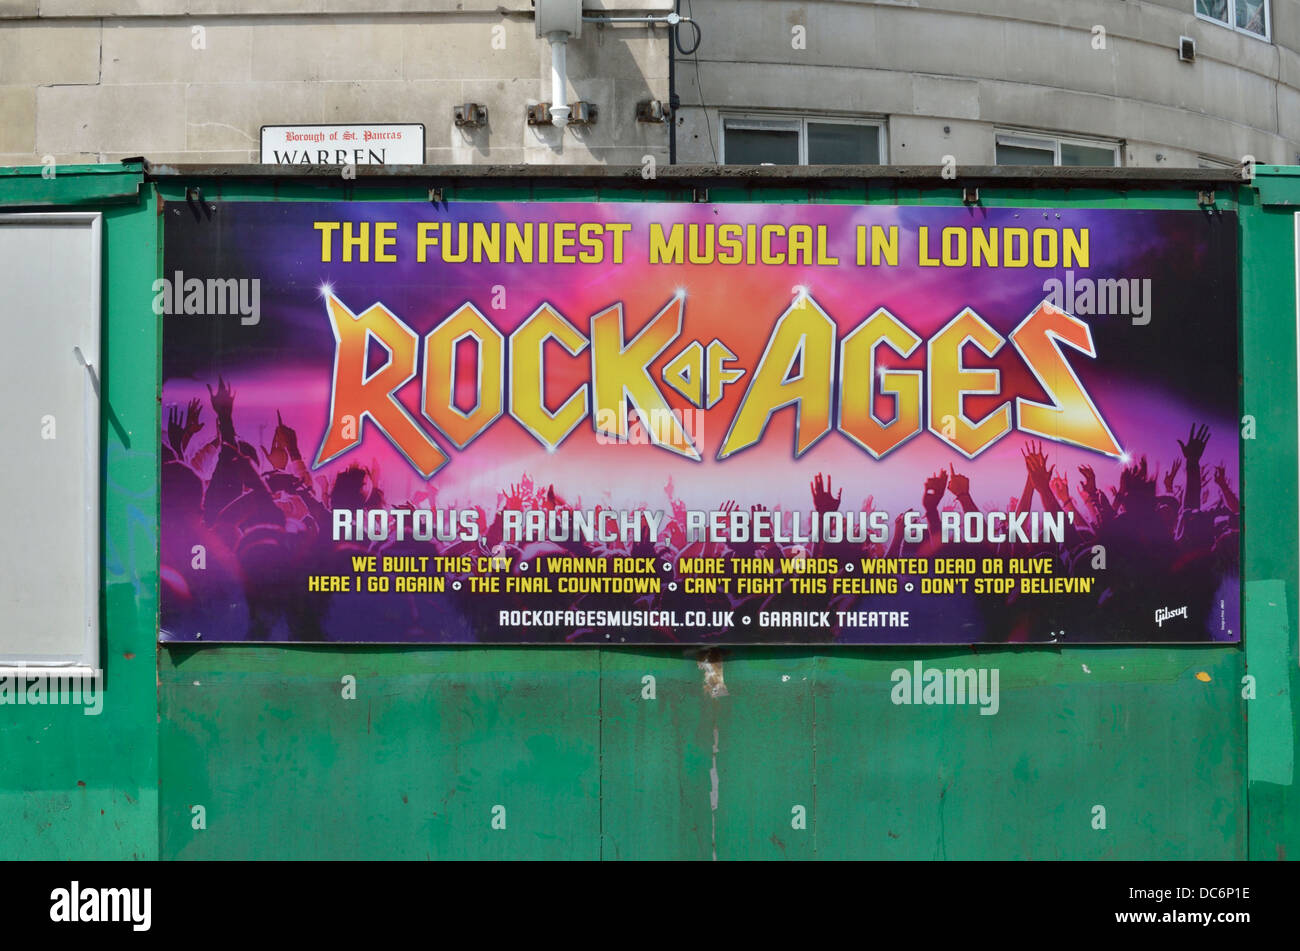 Rock of Ages West End stage musical advertisement on a billboard, London, UK Stock Photo